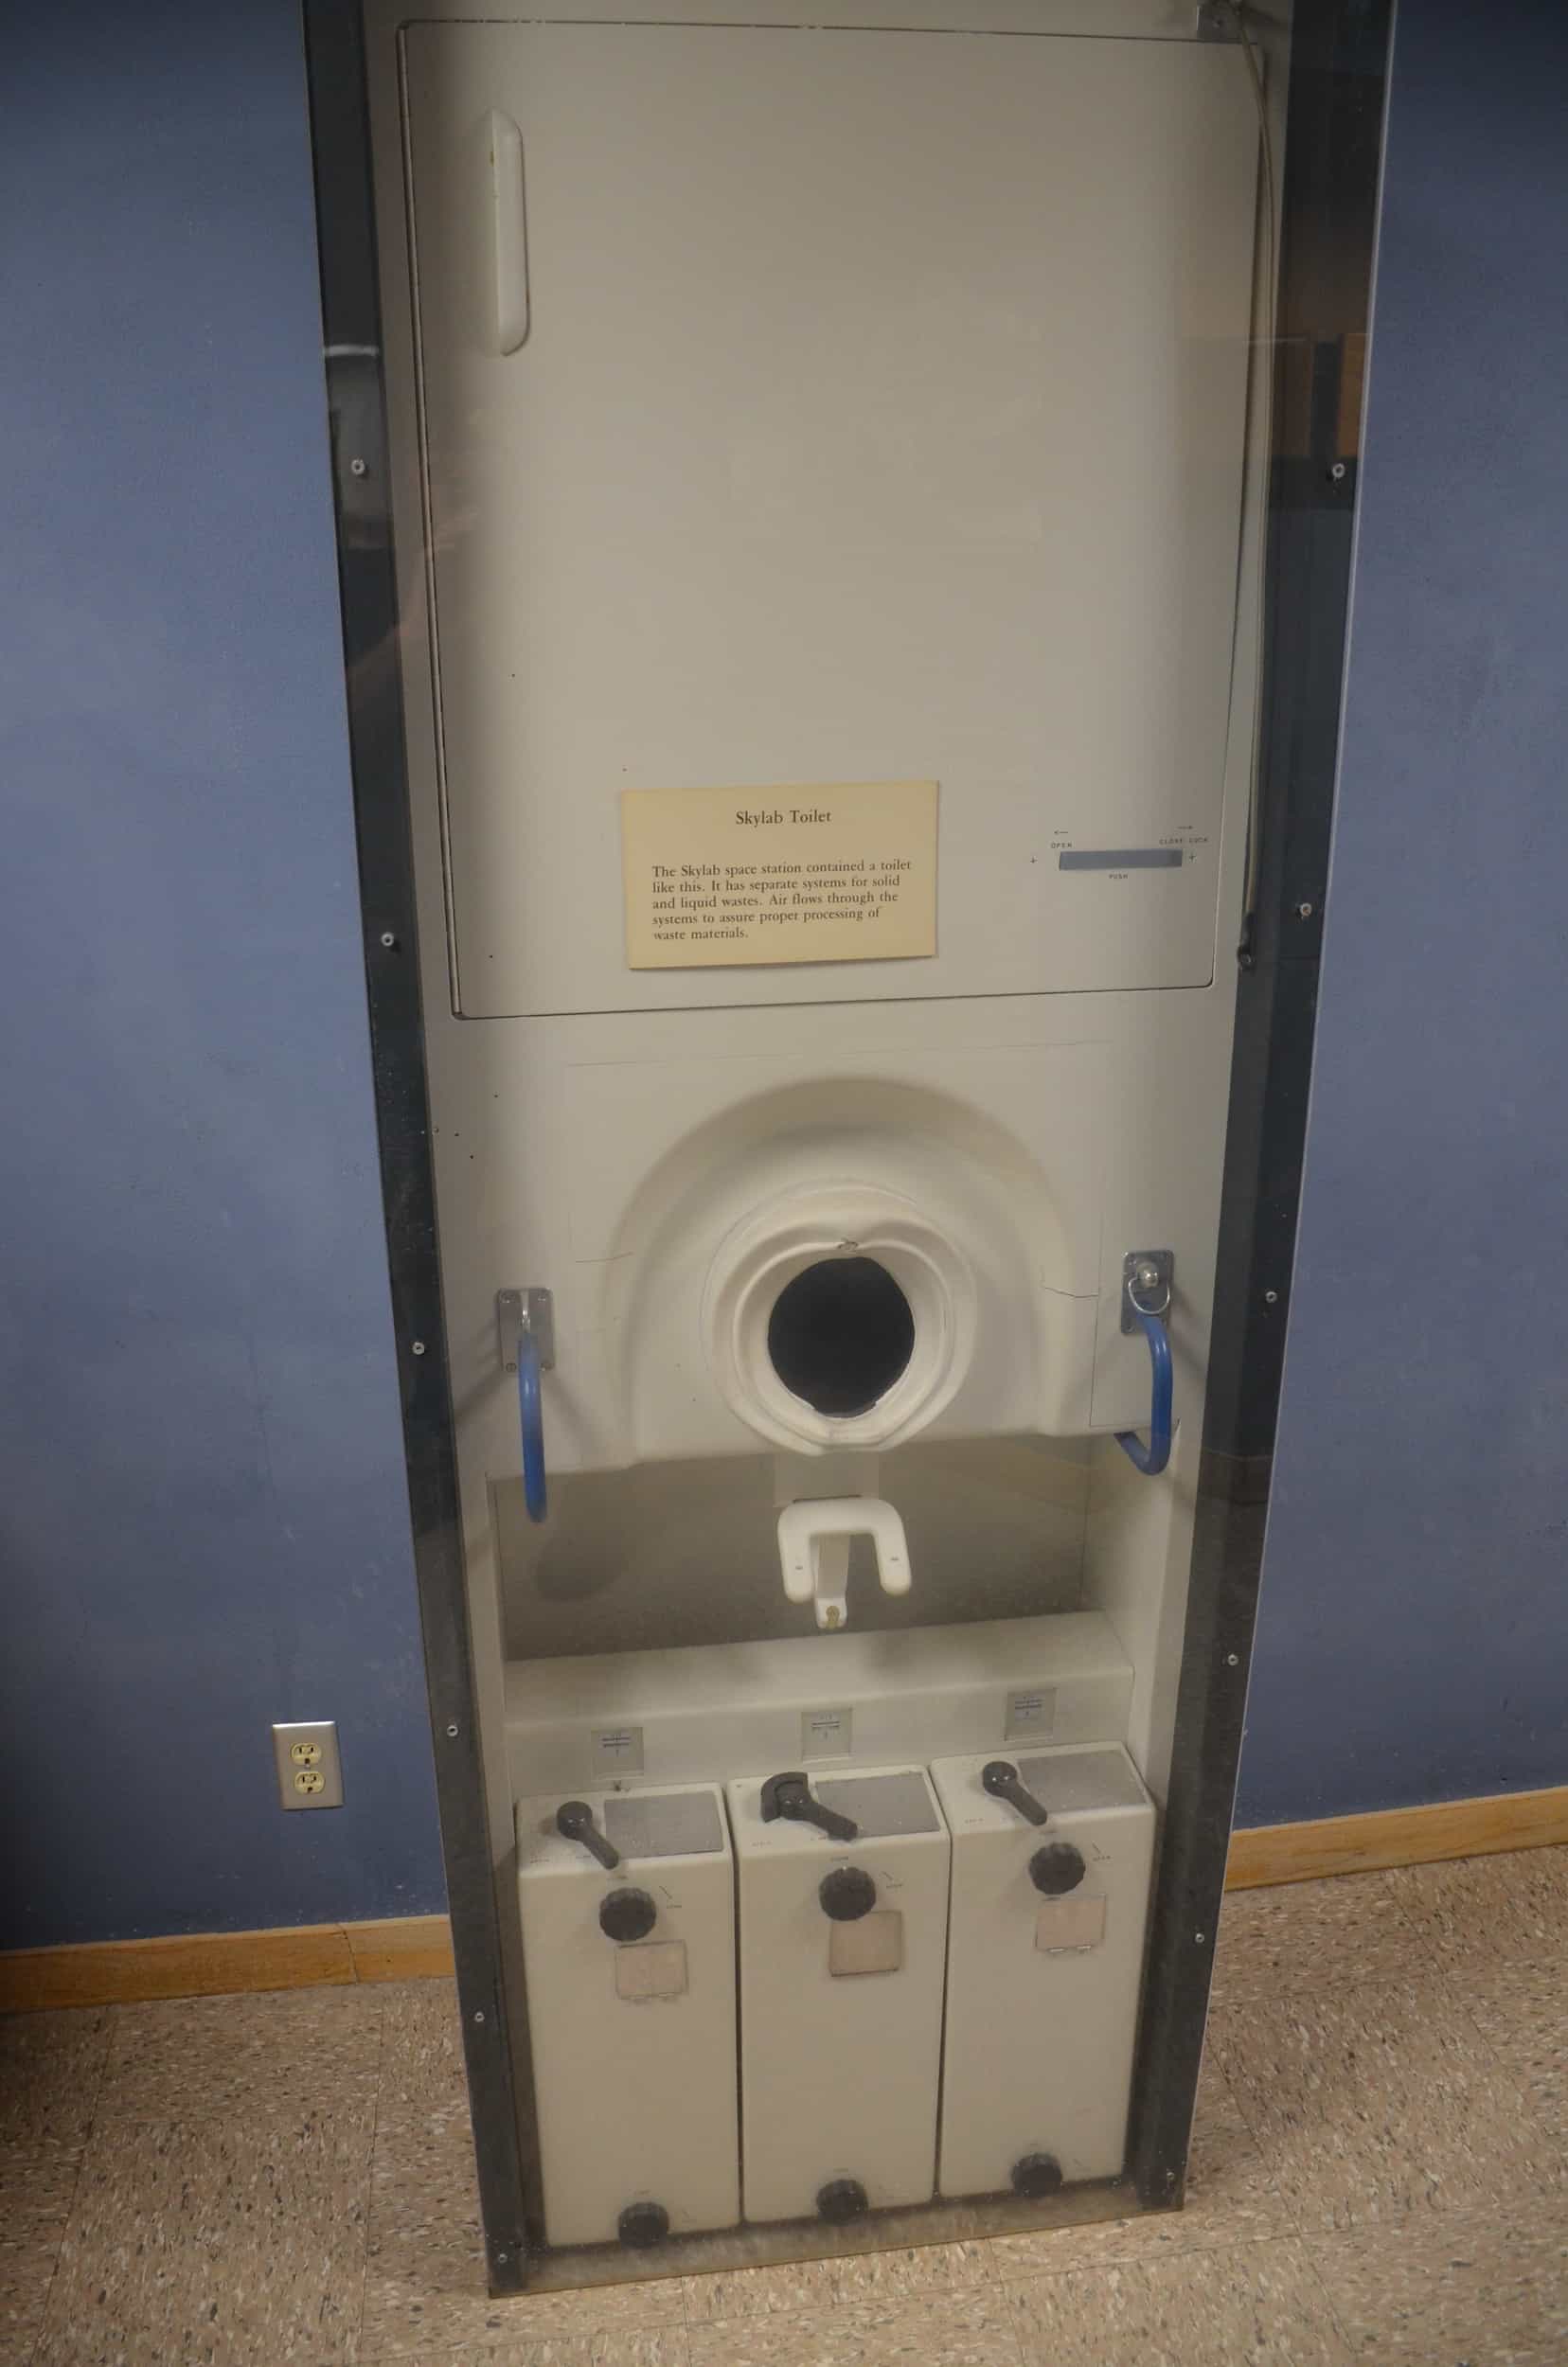 Skylab toilet at the New Mexico Museum of Space History in Alamogordo, New Mexico